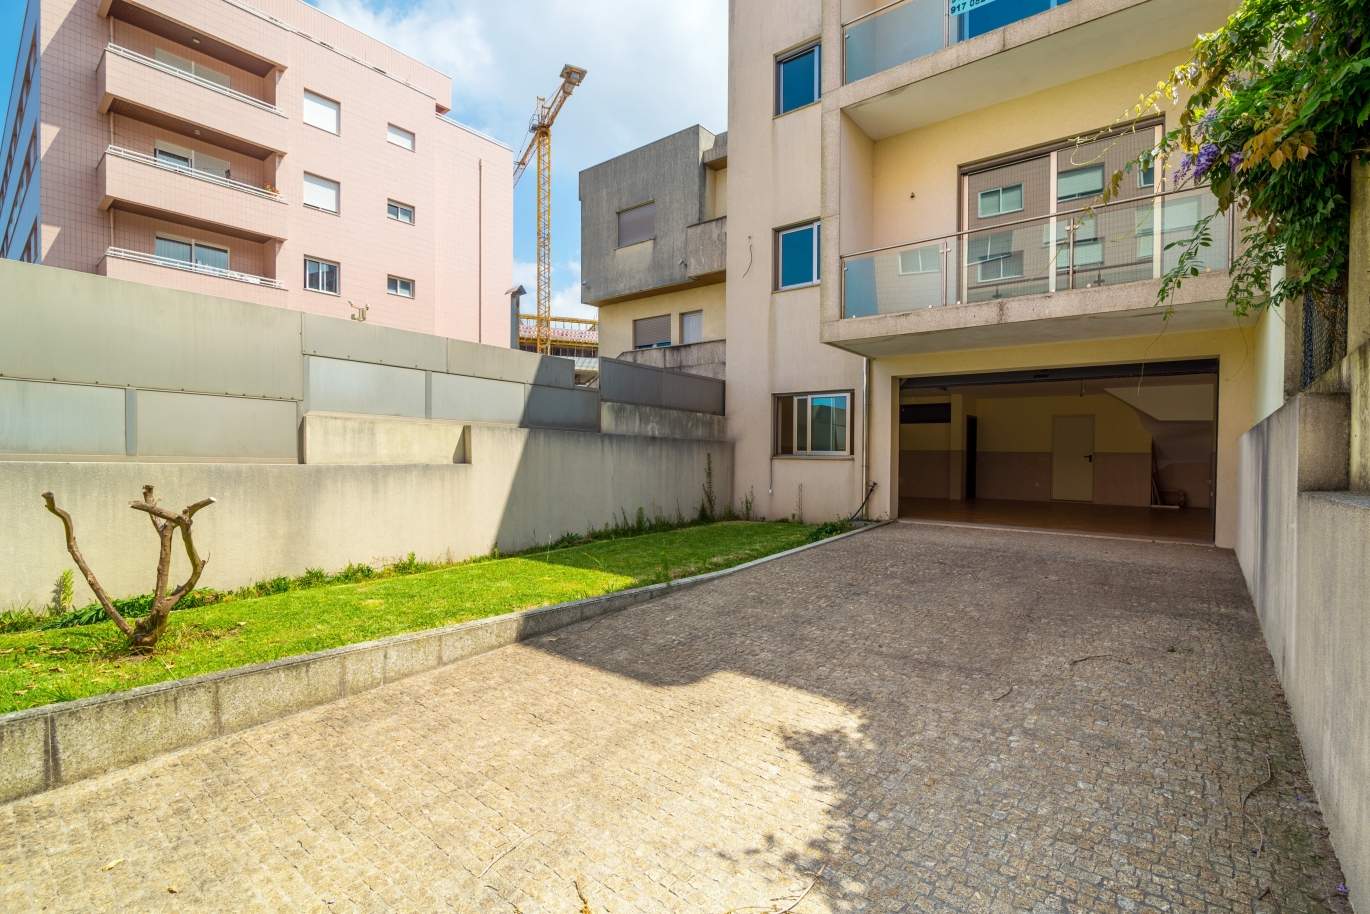 New house, for sale, in residential area of V.N. Gaia, Porto, Portugal_143702